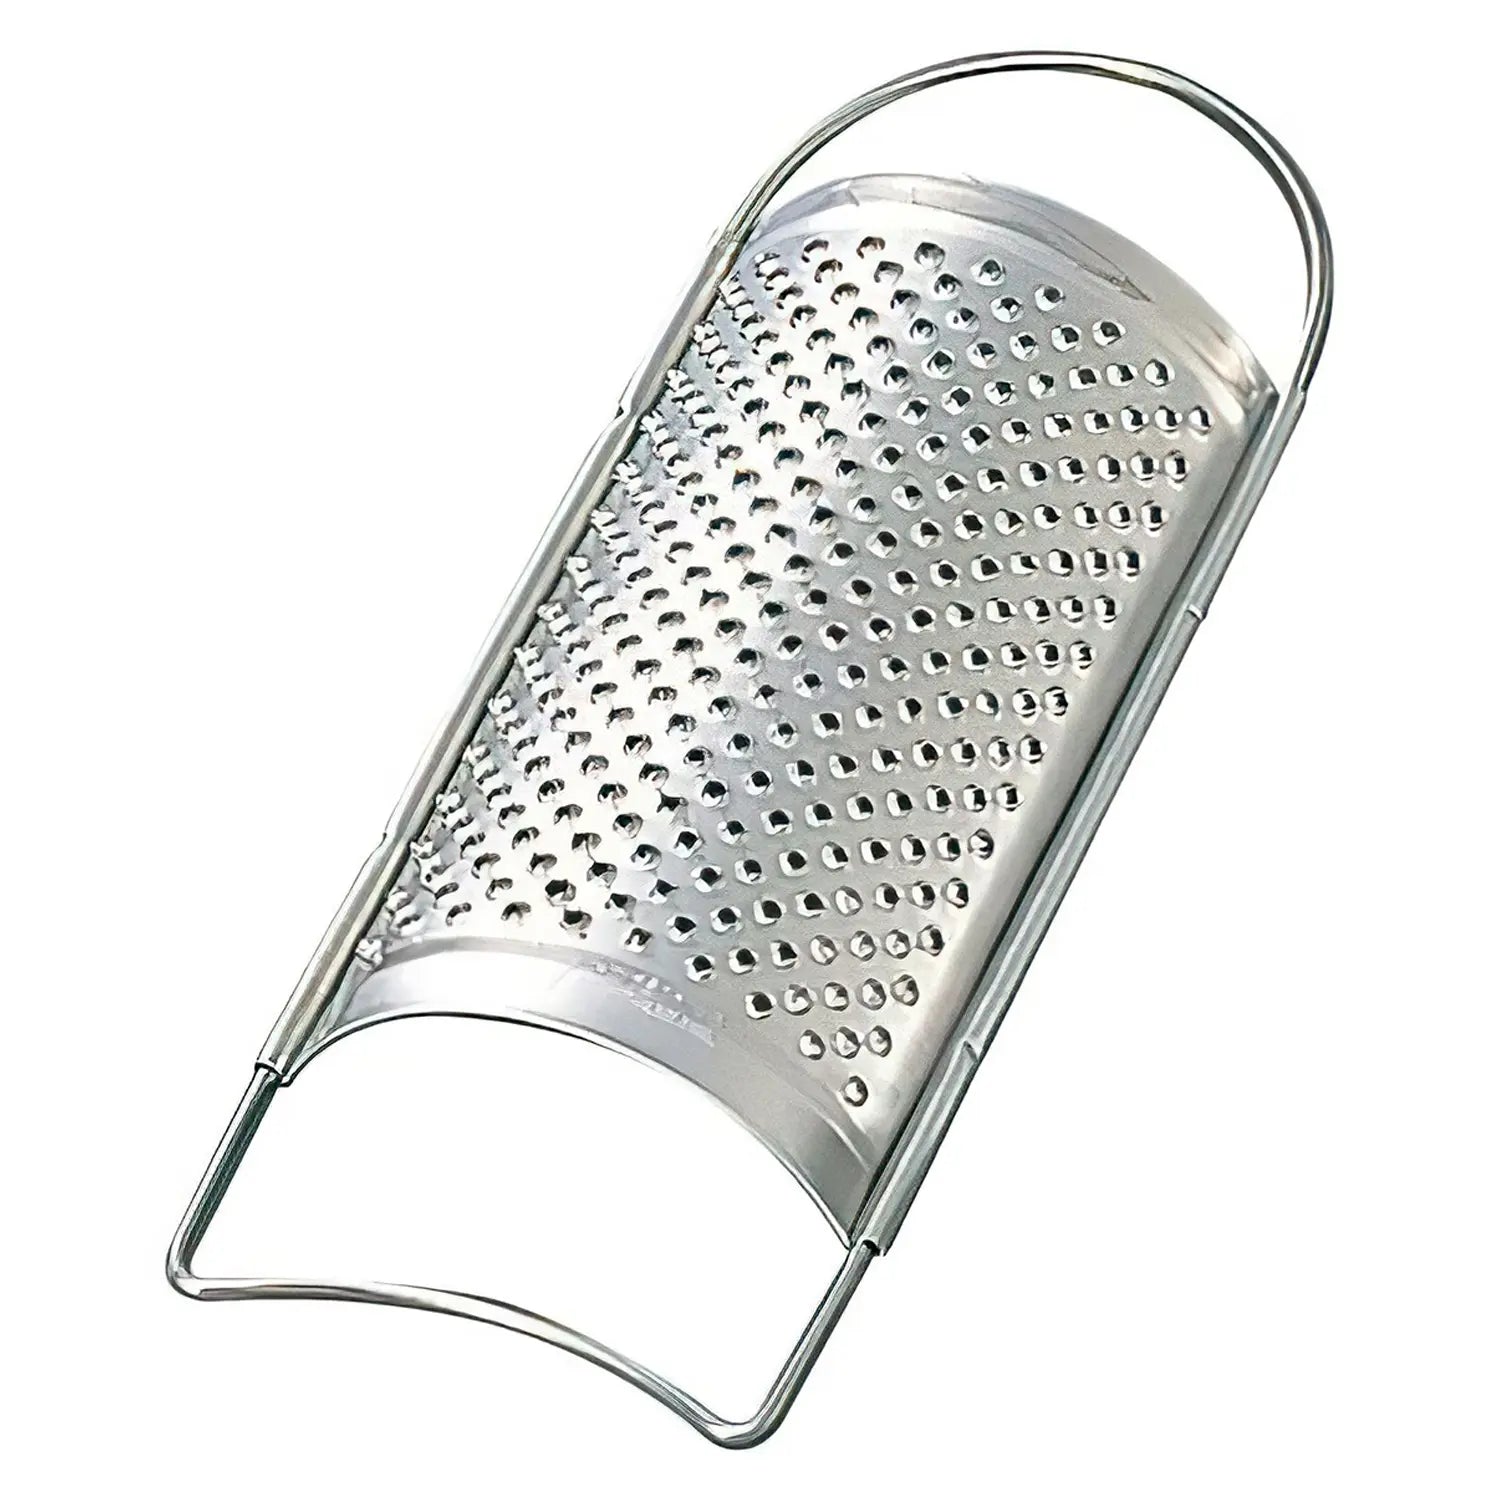 Cheese Grater - Northern Pizza Equipment